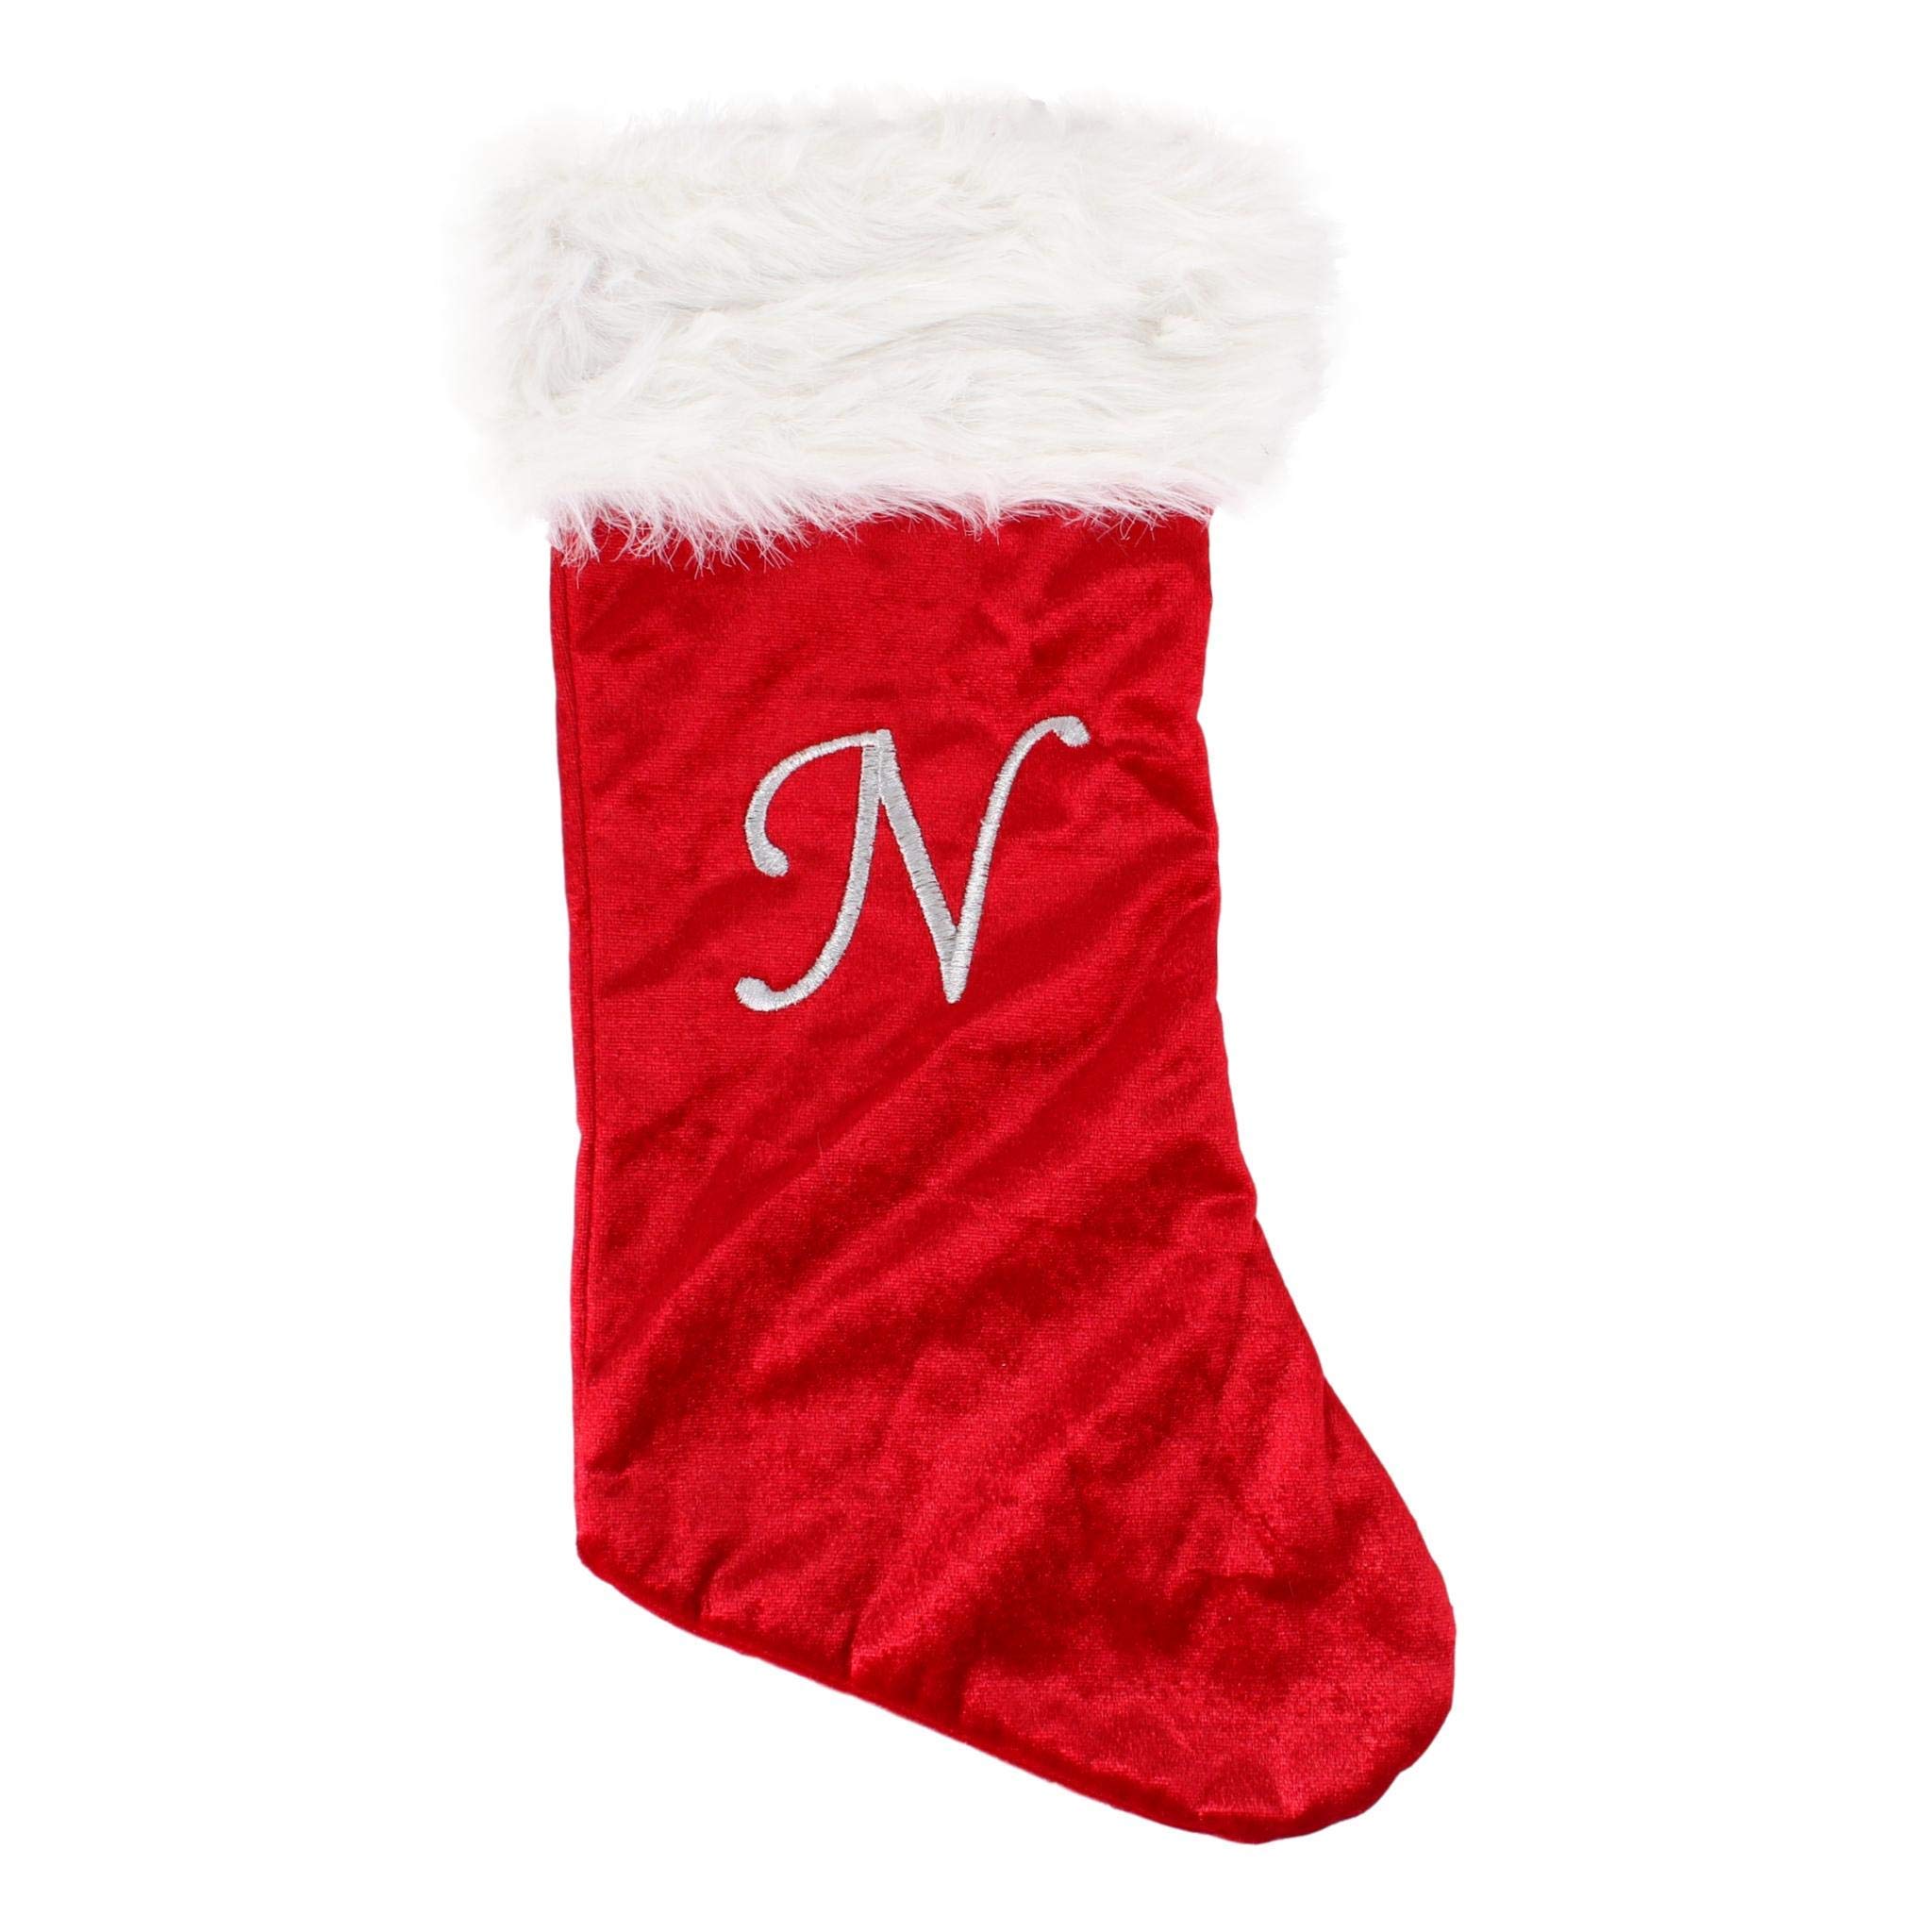 RED MONOGRAM CHRISTMAS STOCKING WITH BELLS HOLIDAY EMBROIDERED LETTER "S" NEW 